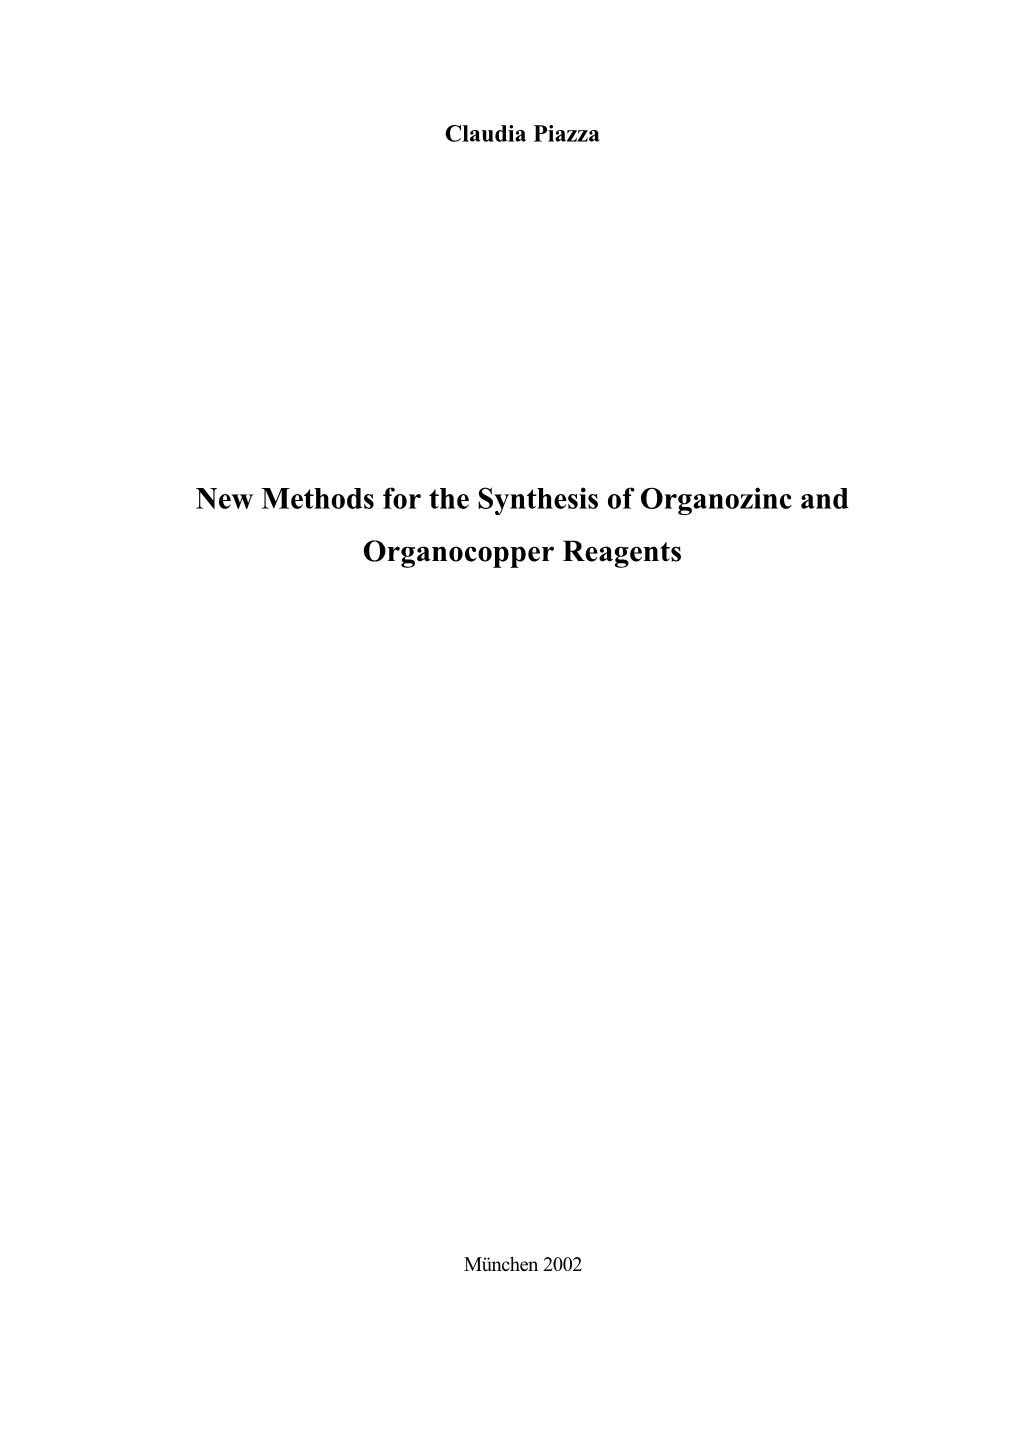 New Methods for the Synthesis of Organozinc and Organocopper Reagents